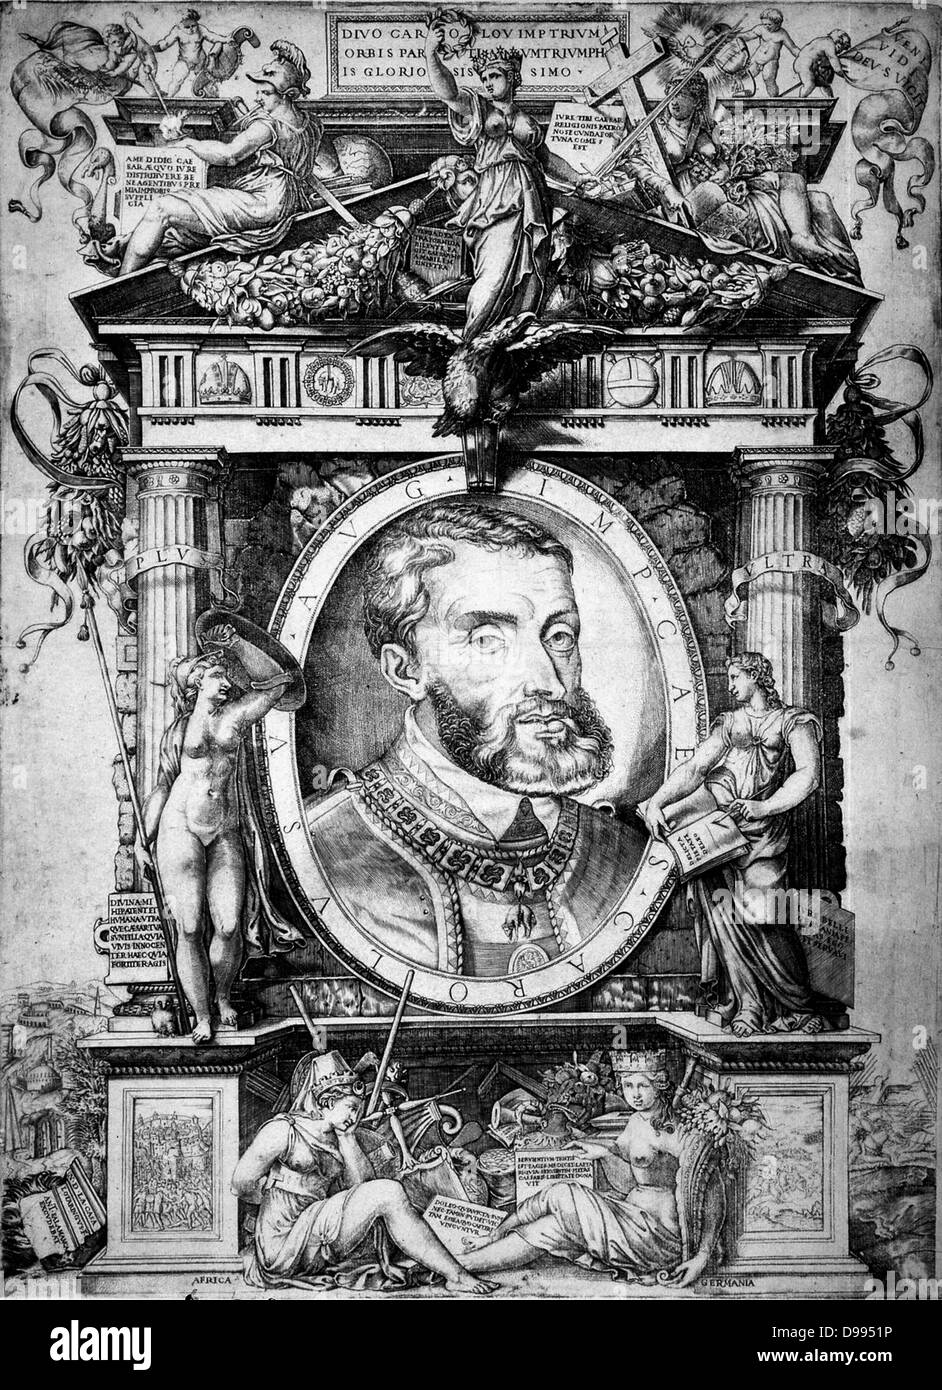 Charles V (1500-1558) Charles I of Spain 1519-1556, Holy Roman Empire 1519-1558. Portrait engraving showing his prominent lower 'Hapsburg' deformed jaw which made chewing his food difficult. Stock Photo